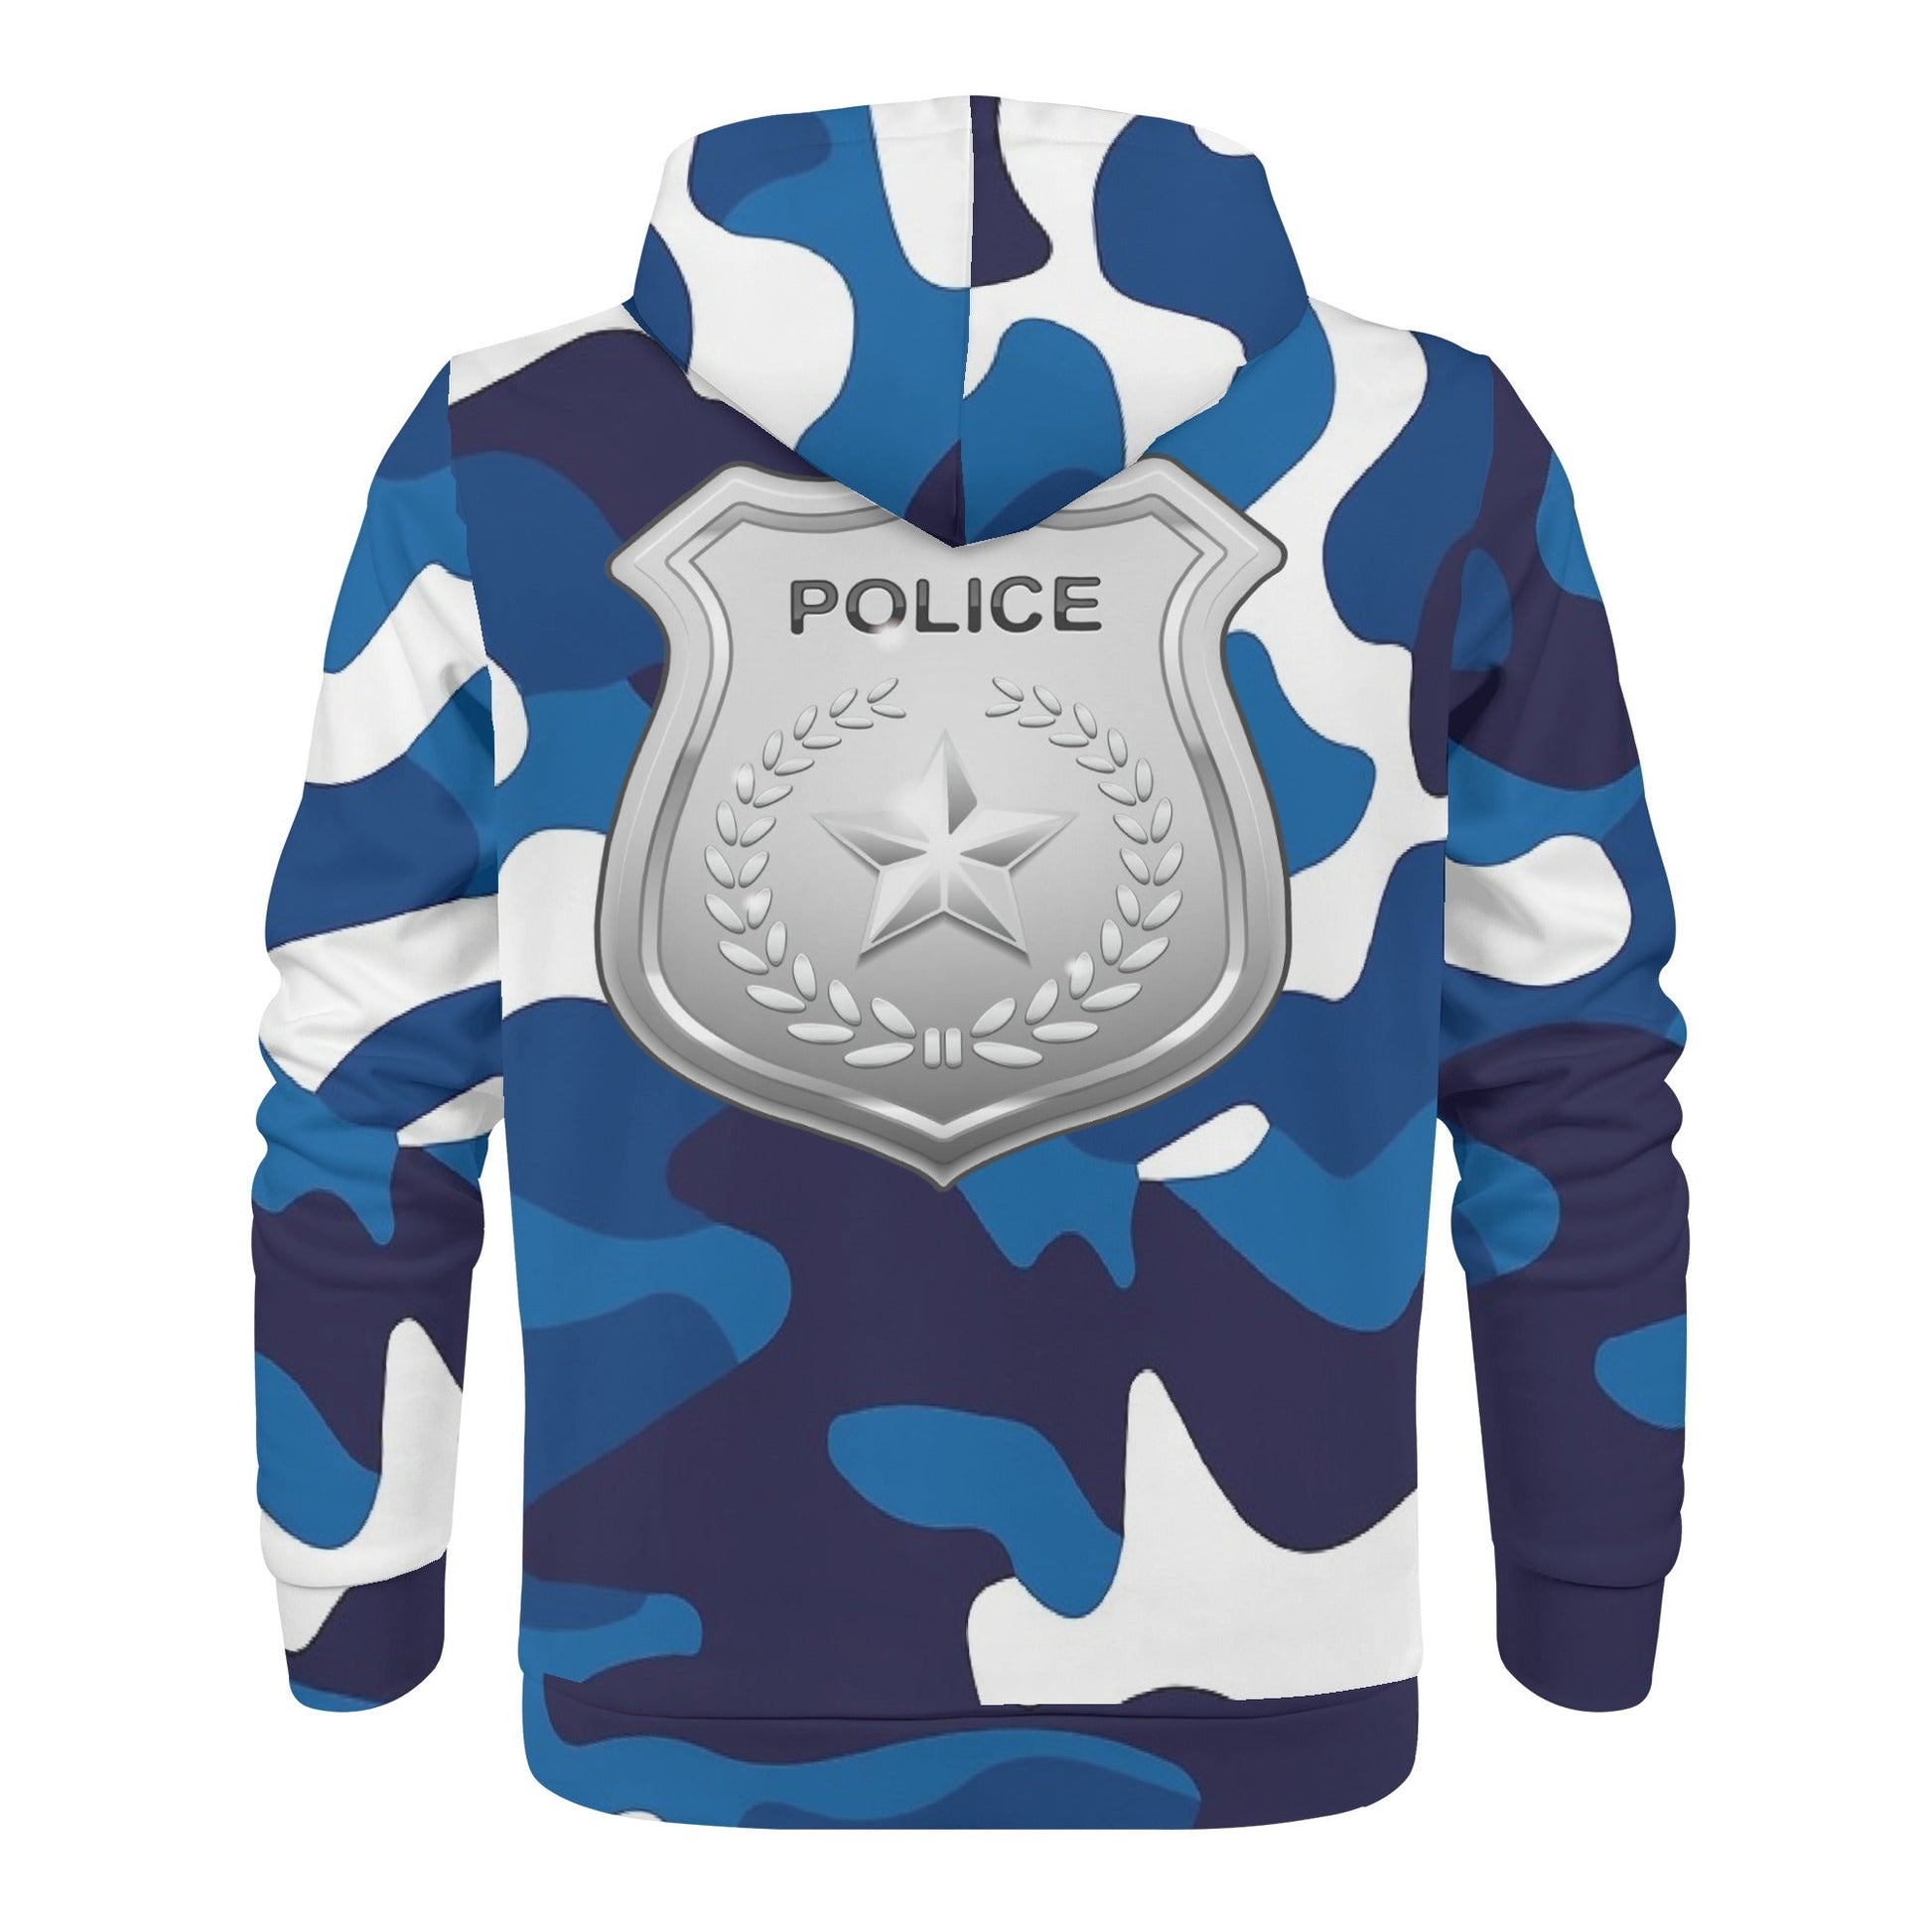 Stand out  with the  Nugget Army Police Mens Zip Up Hoodie  available at Hey Nugget. Grab yours today!